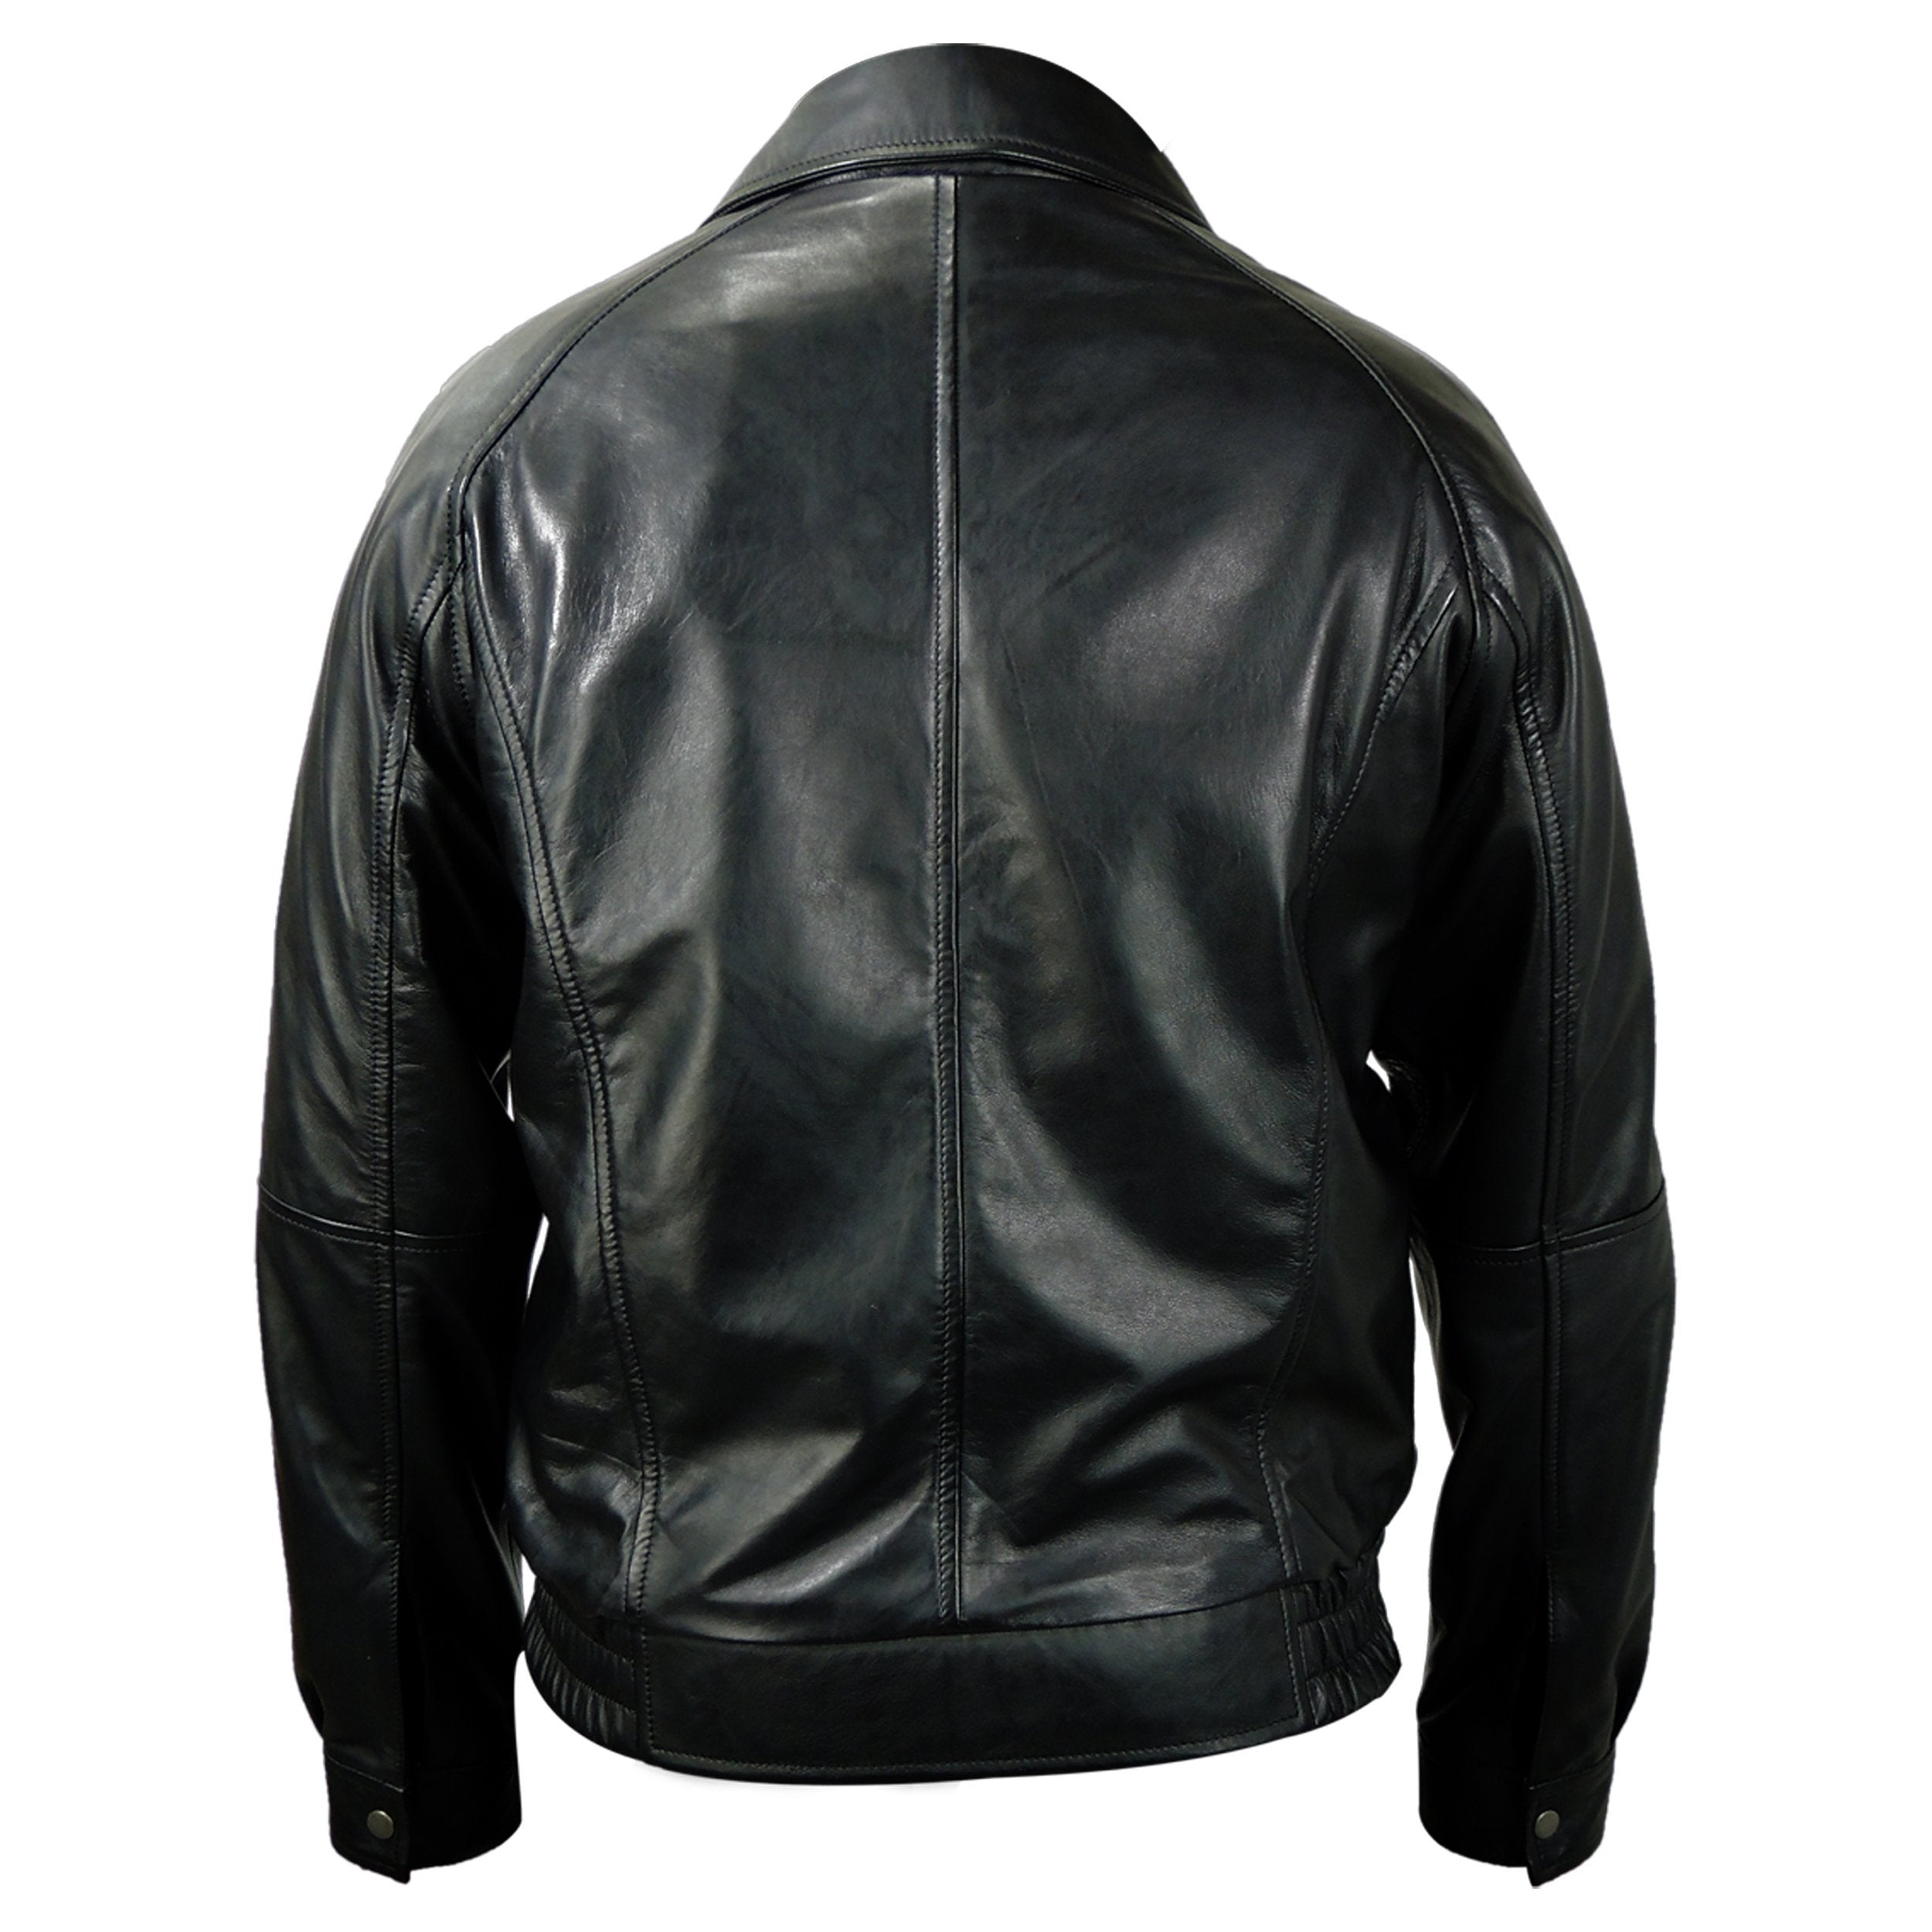 Picture of a Men's Genuine Leather Bomber Jacket in black back view